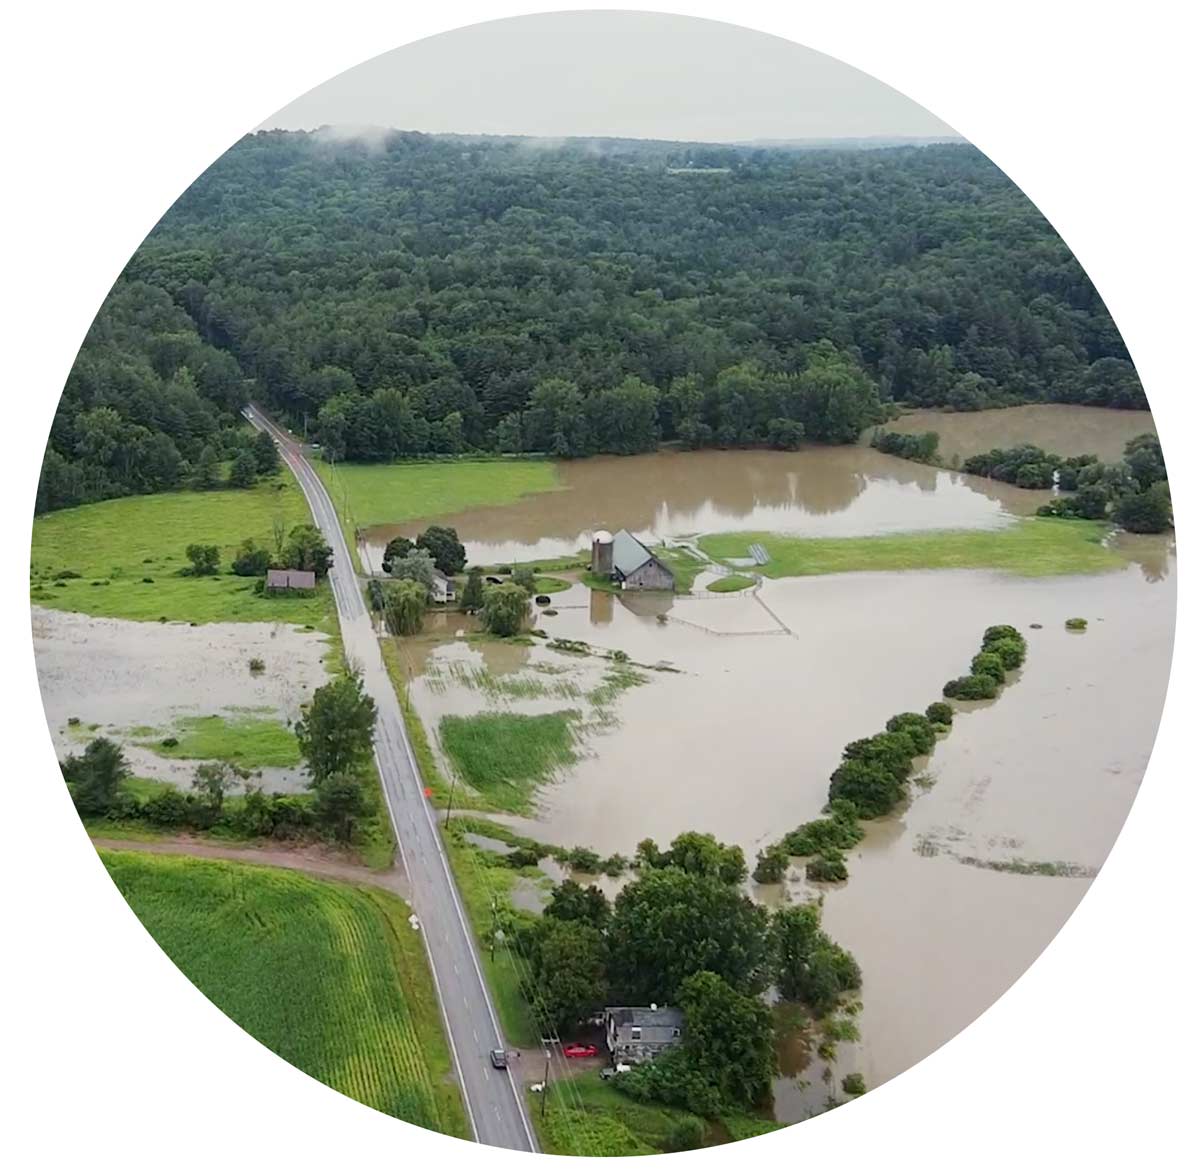 Vermont family farms need your support to recover from flooding and extreme weather